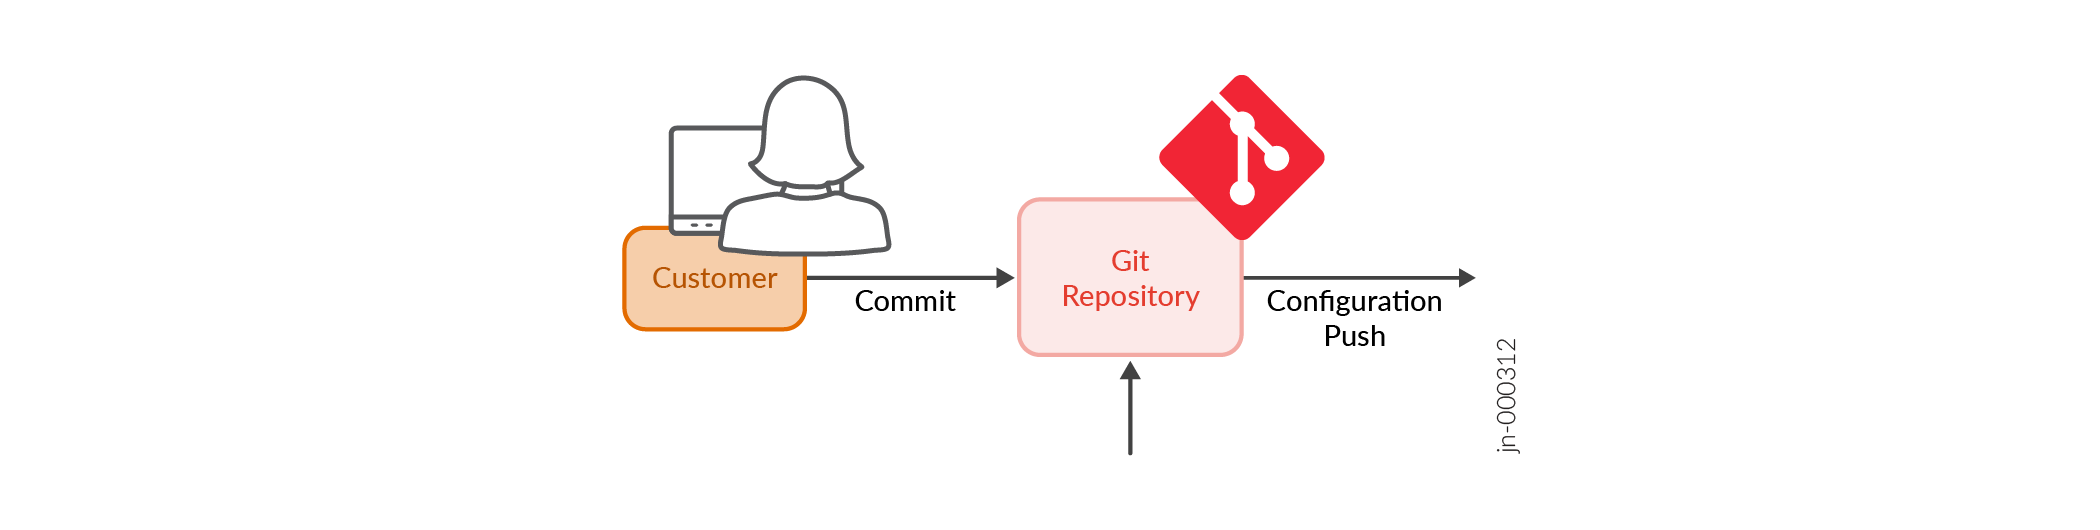 CN2 Configurations in Customer Git Repository